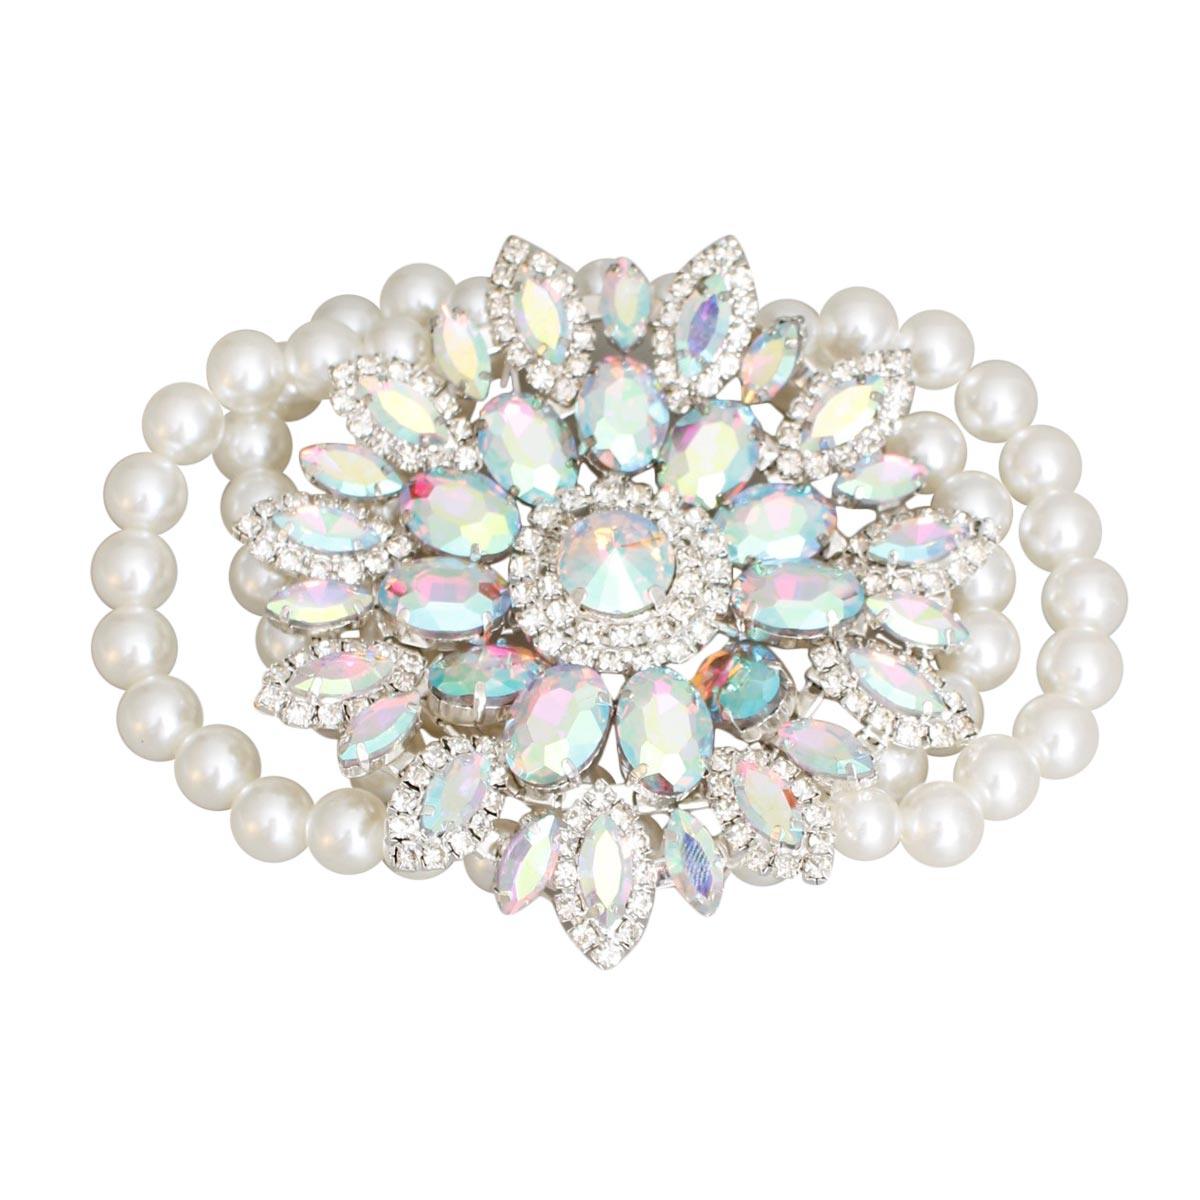 Achieve Stunning Style with Faux Pearls and Holiday Sparkle Bracelet